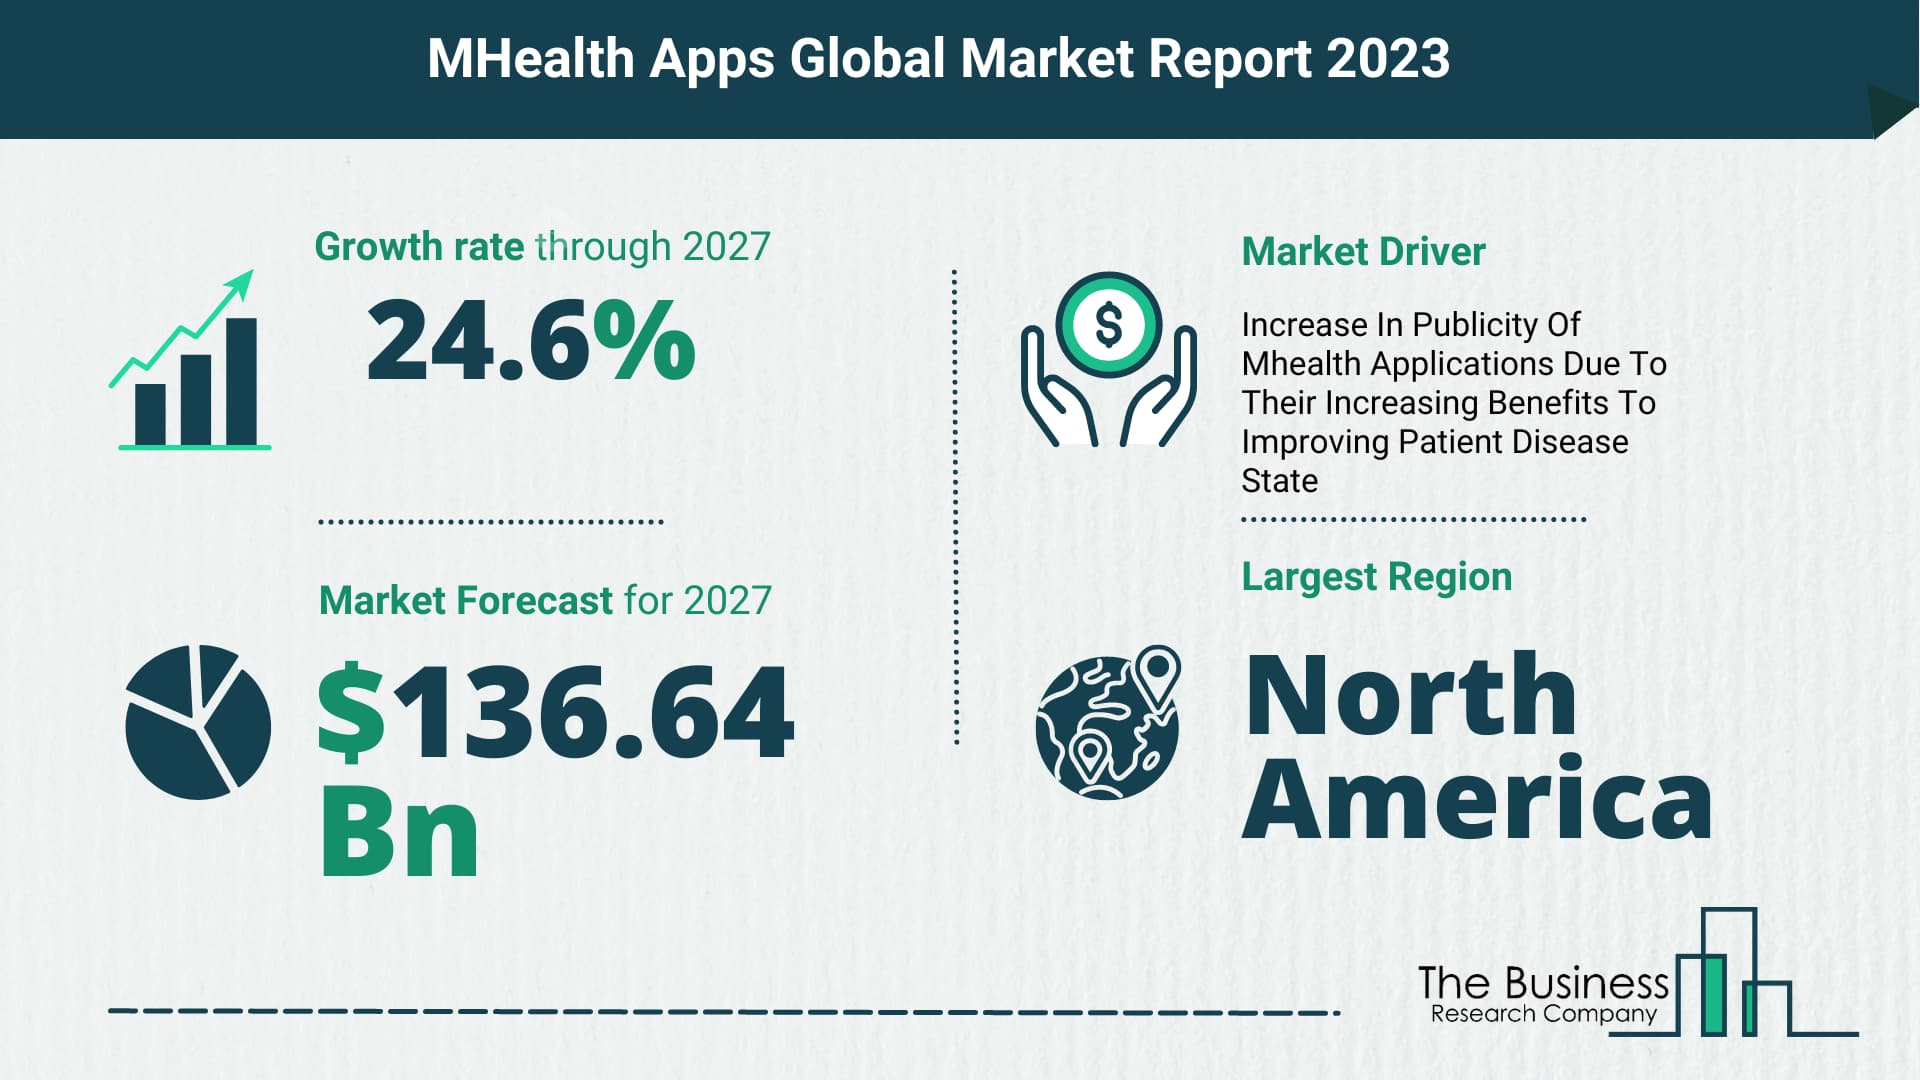 mHealth apps market